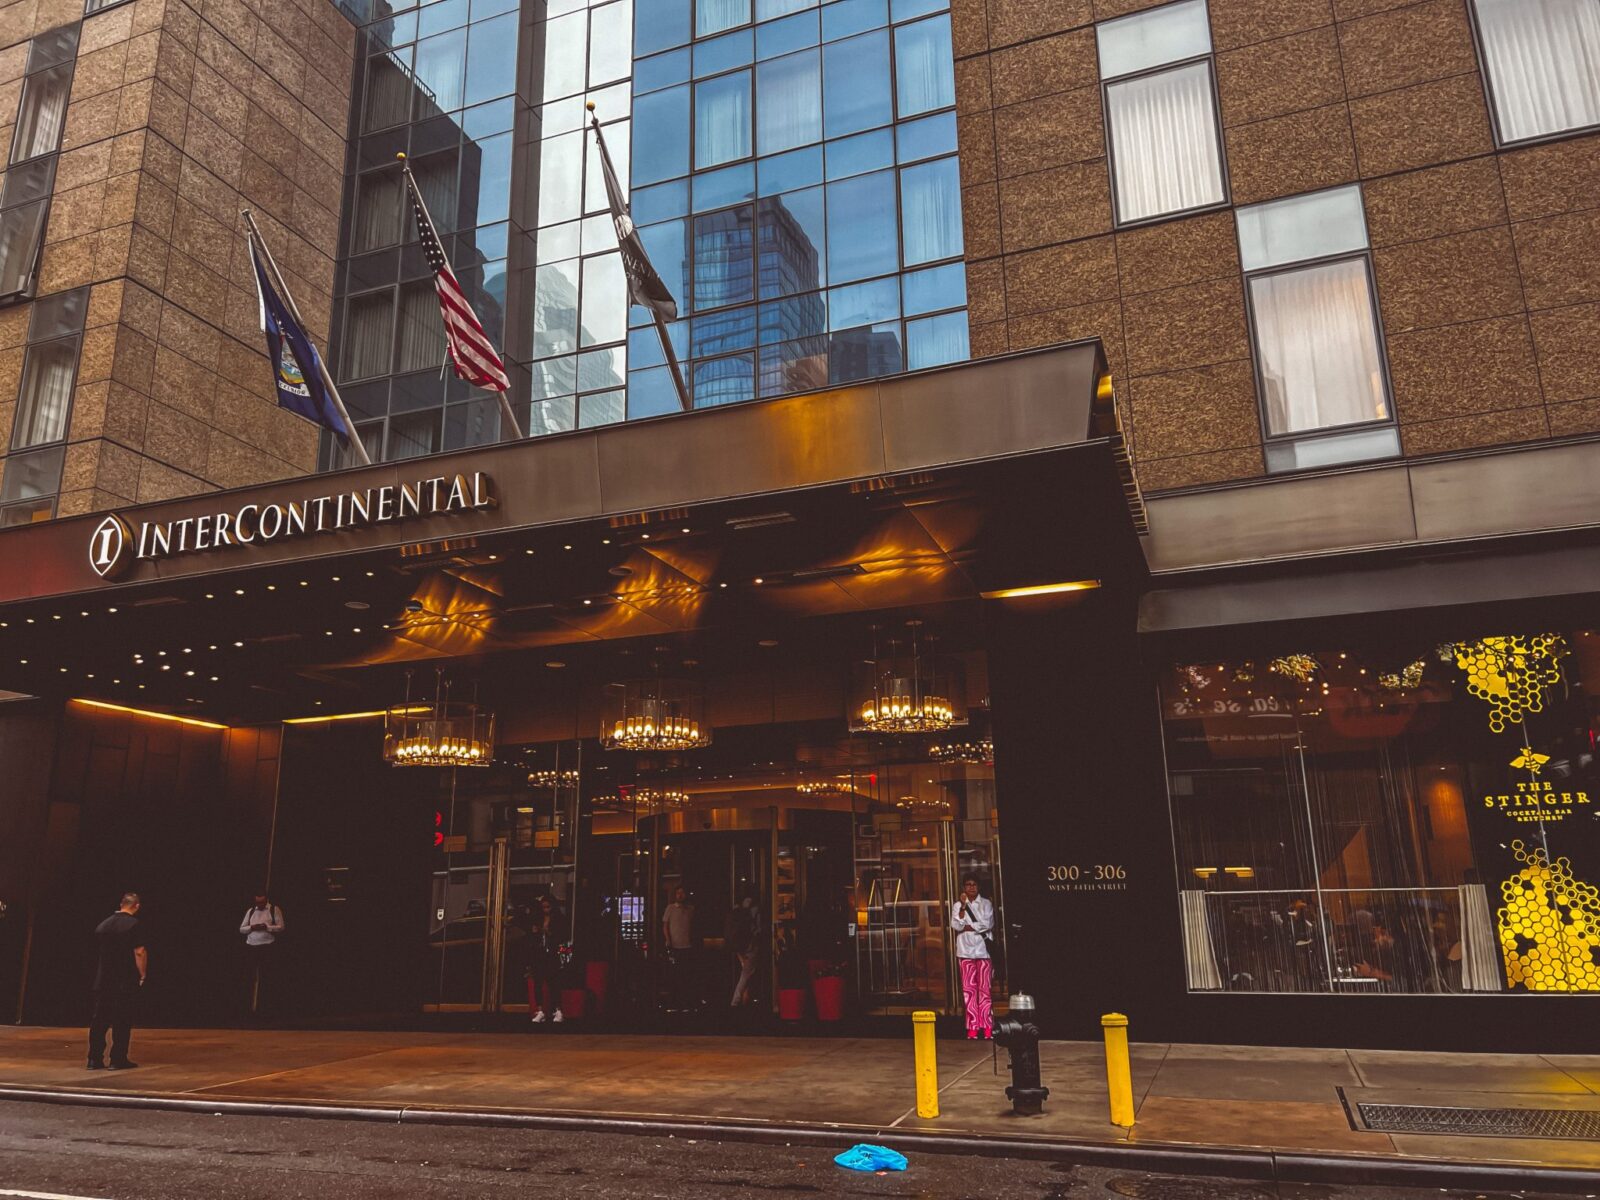 Hotel-Review: InterContinental New York Times Square